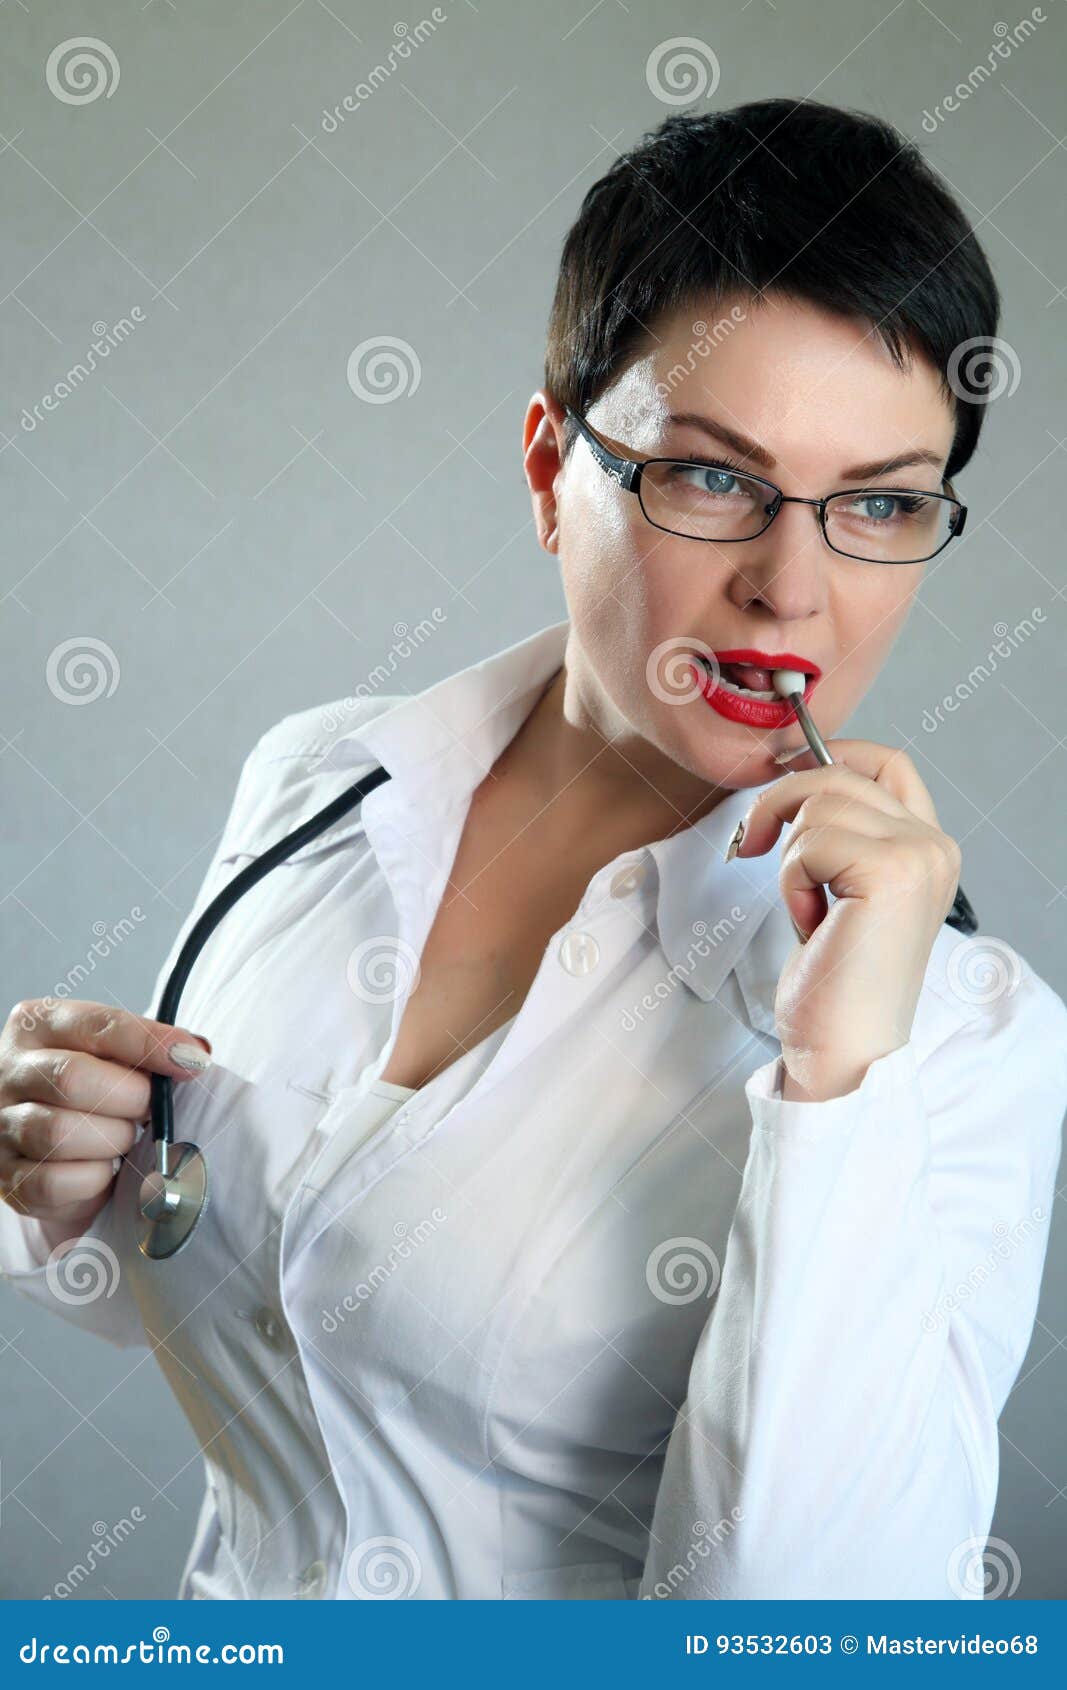 Portrait Of A Beautiful And Female Doctor In A Hospital Stock Image Image Of Medicine Looking